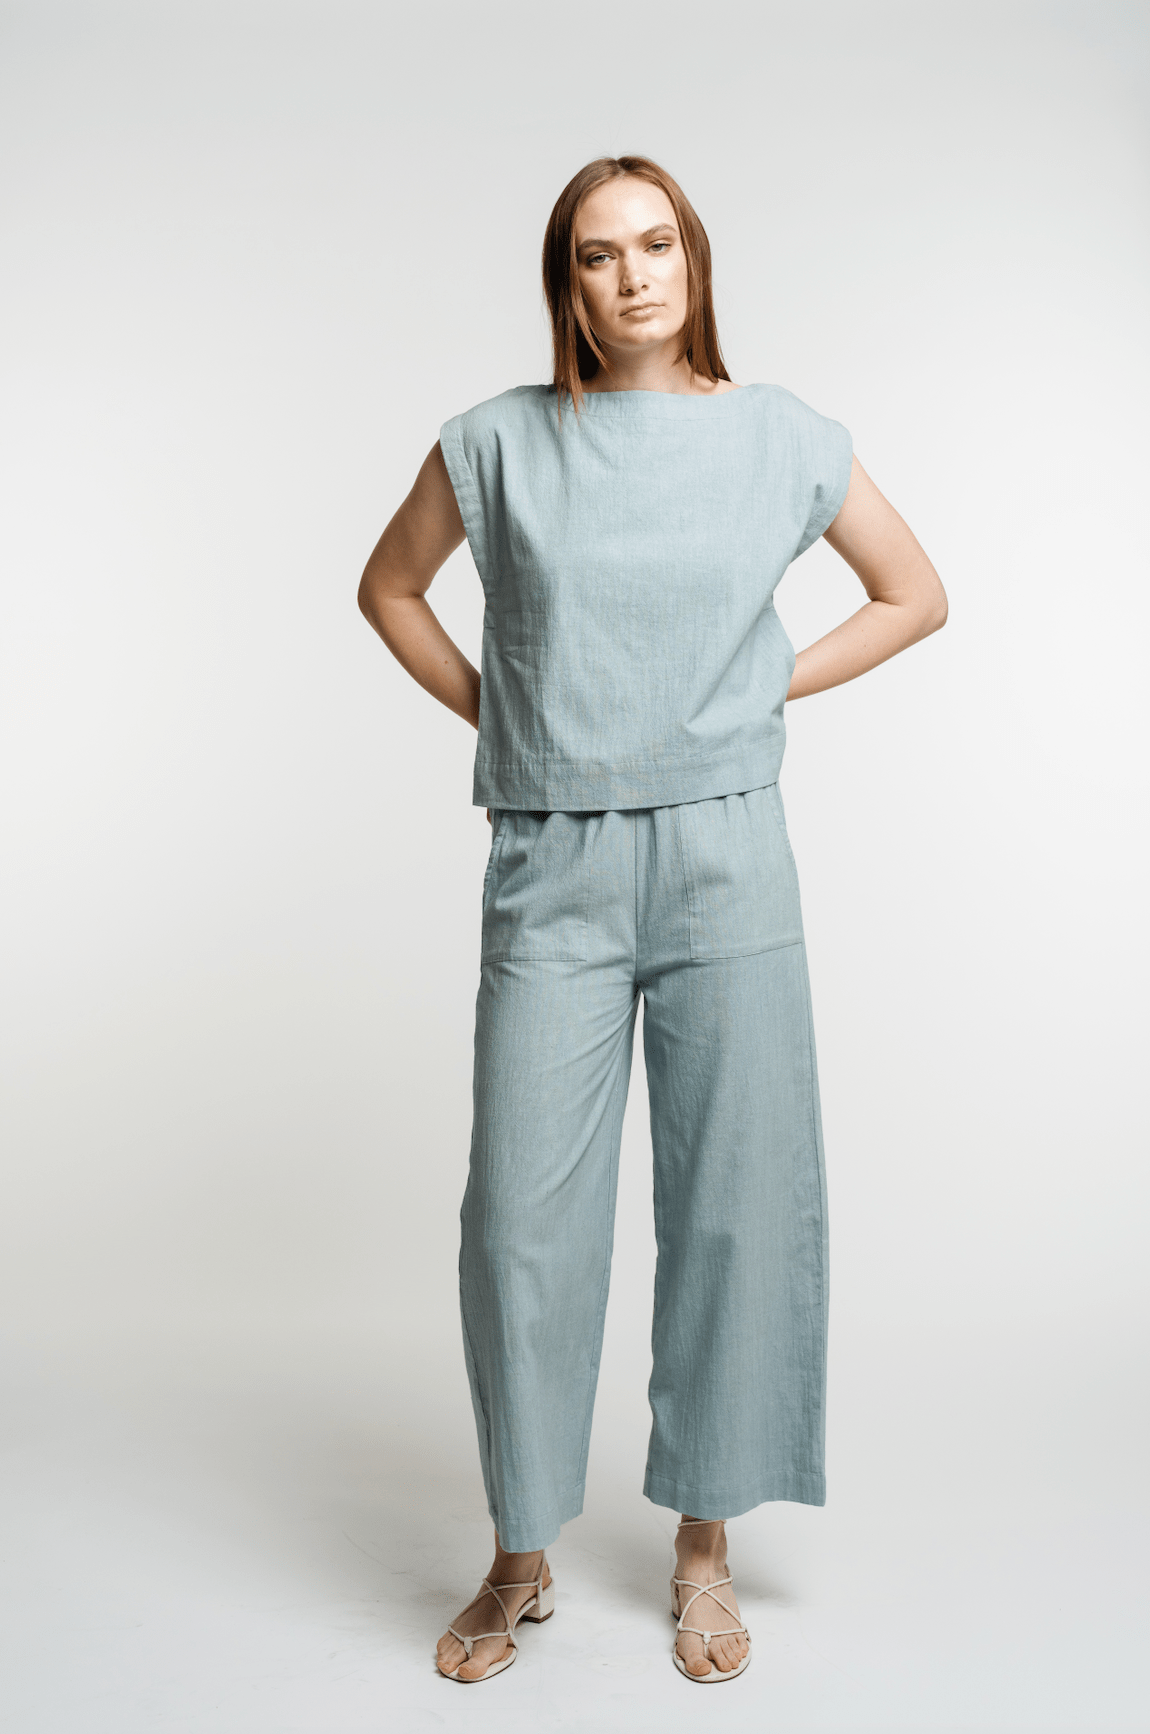 The model is wearing a light blue linen Everyday Top - Cielo made from organic cotton.